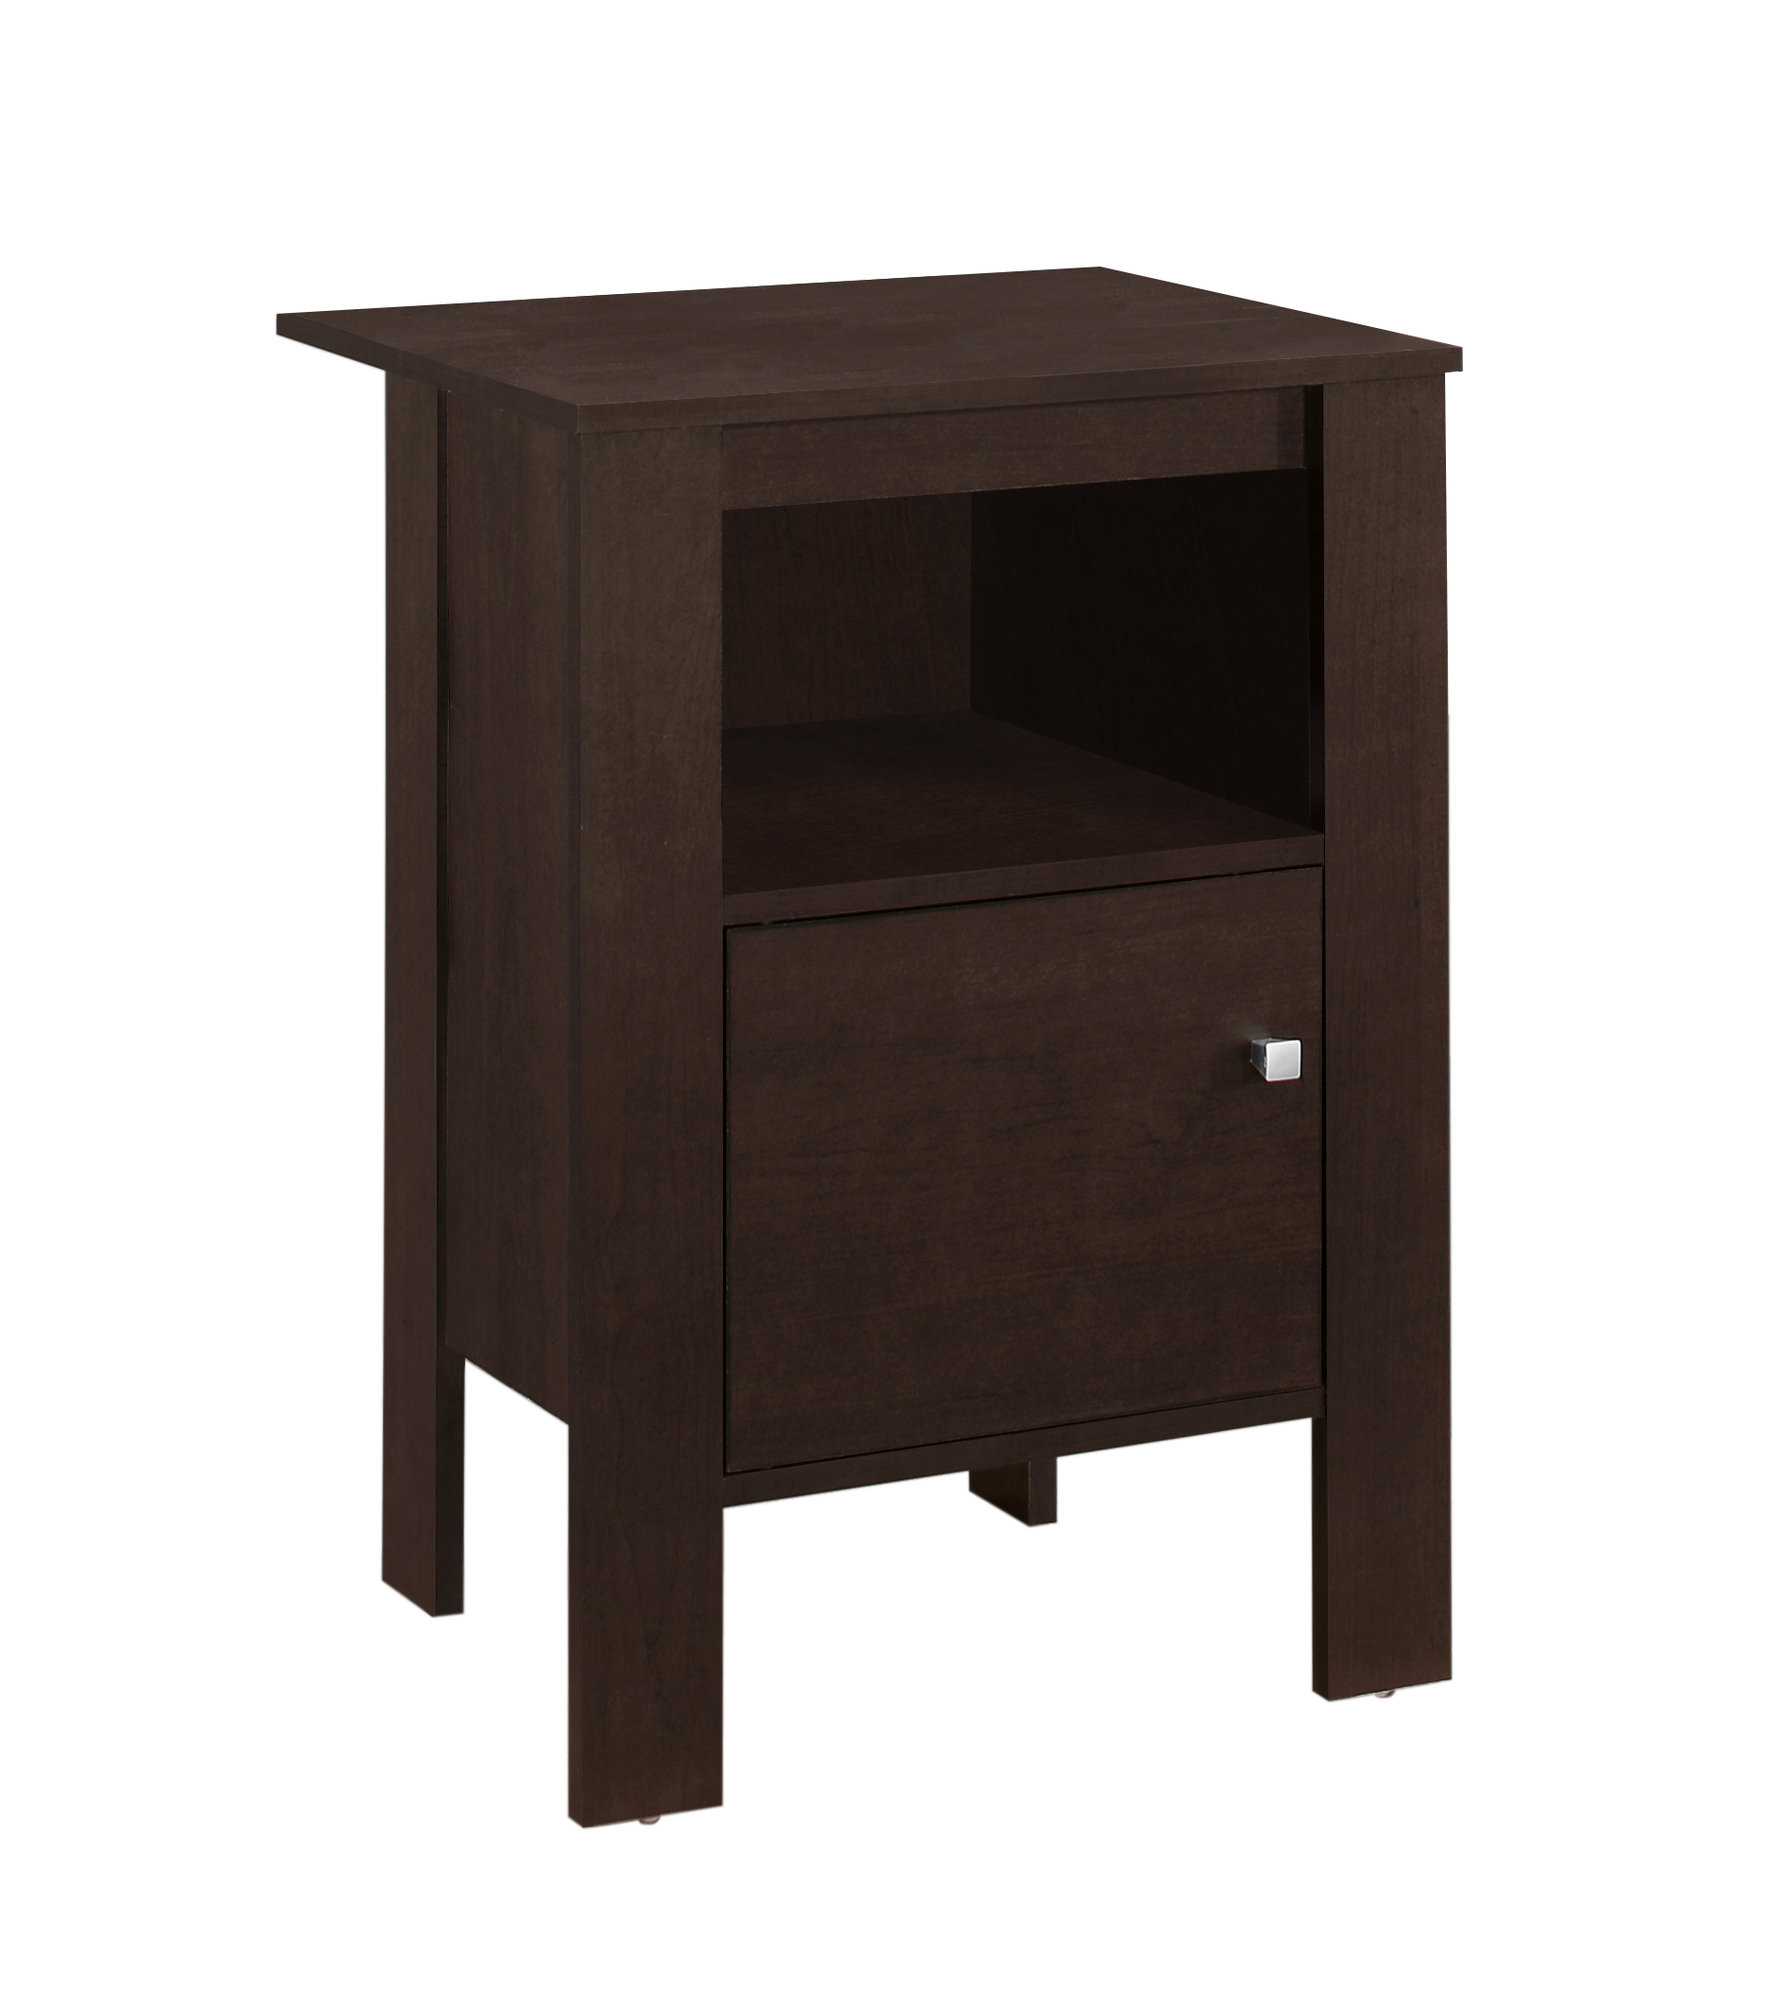 ACCENT TABLE - CAPPUCCINO NIGHT STAND WITH STORAGE